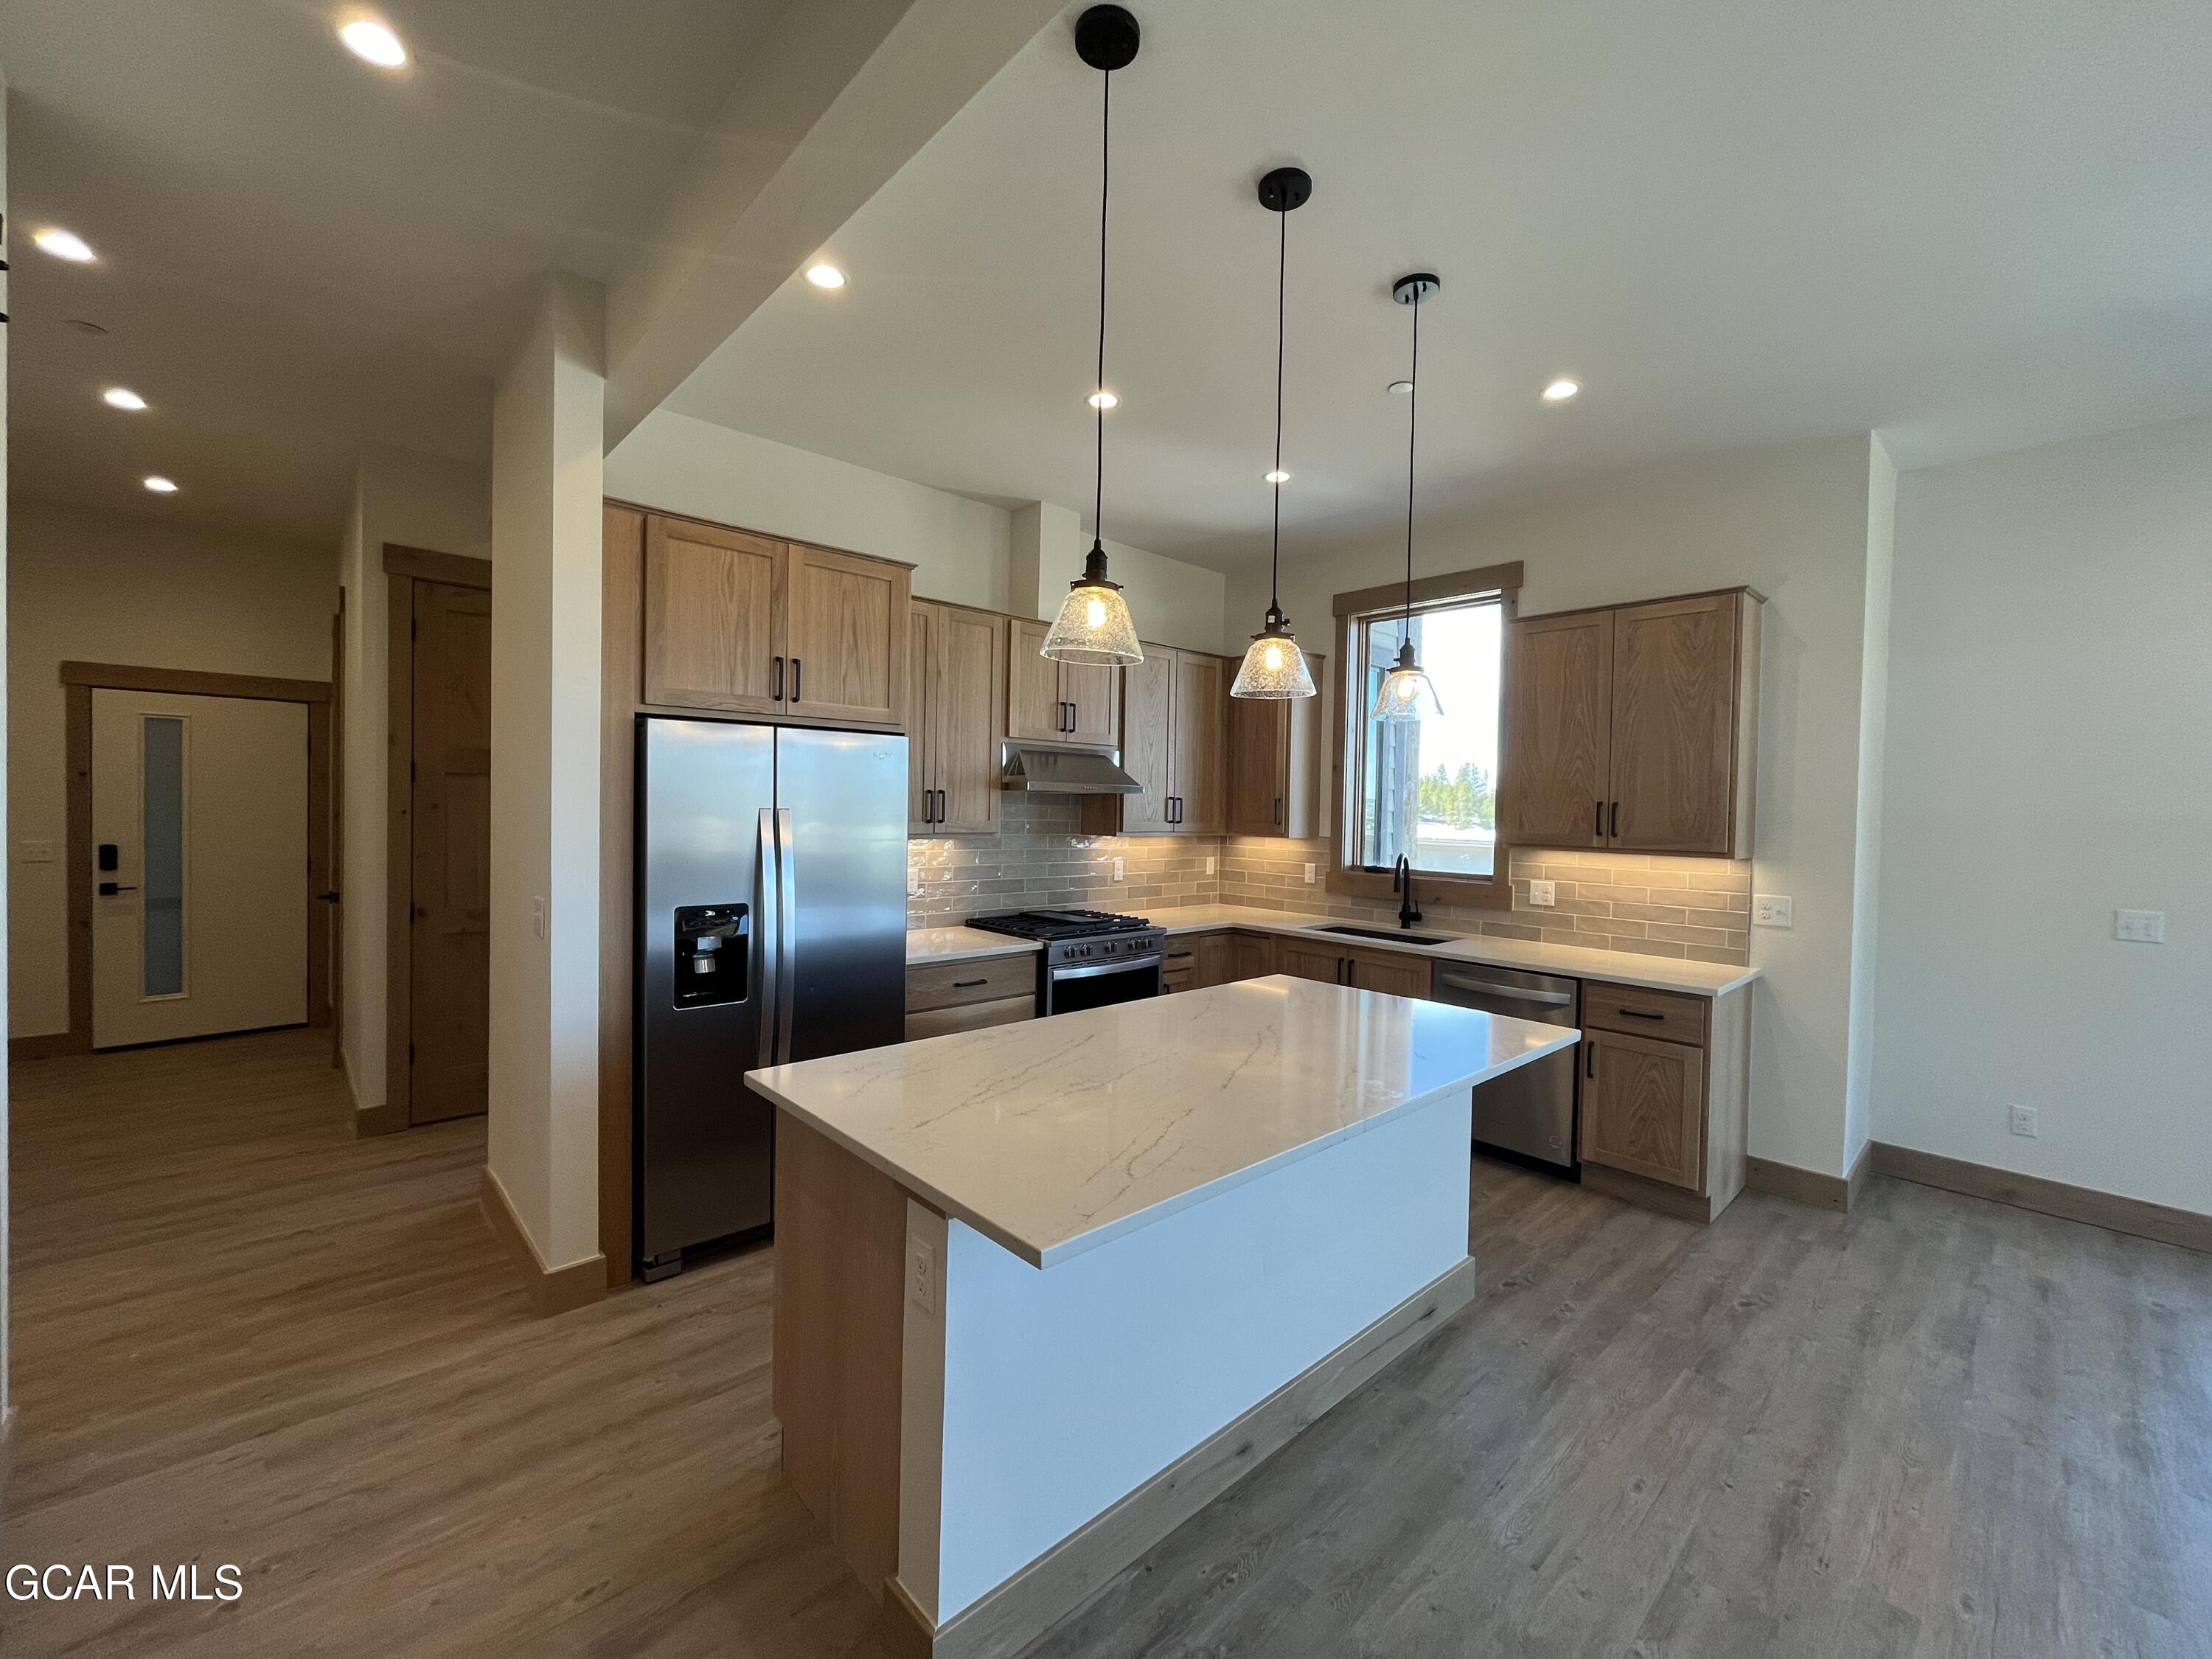 a large kitchen with a center island wooden floor stainless steel appliances and a window